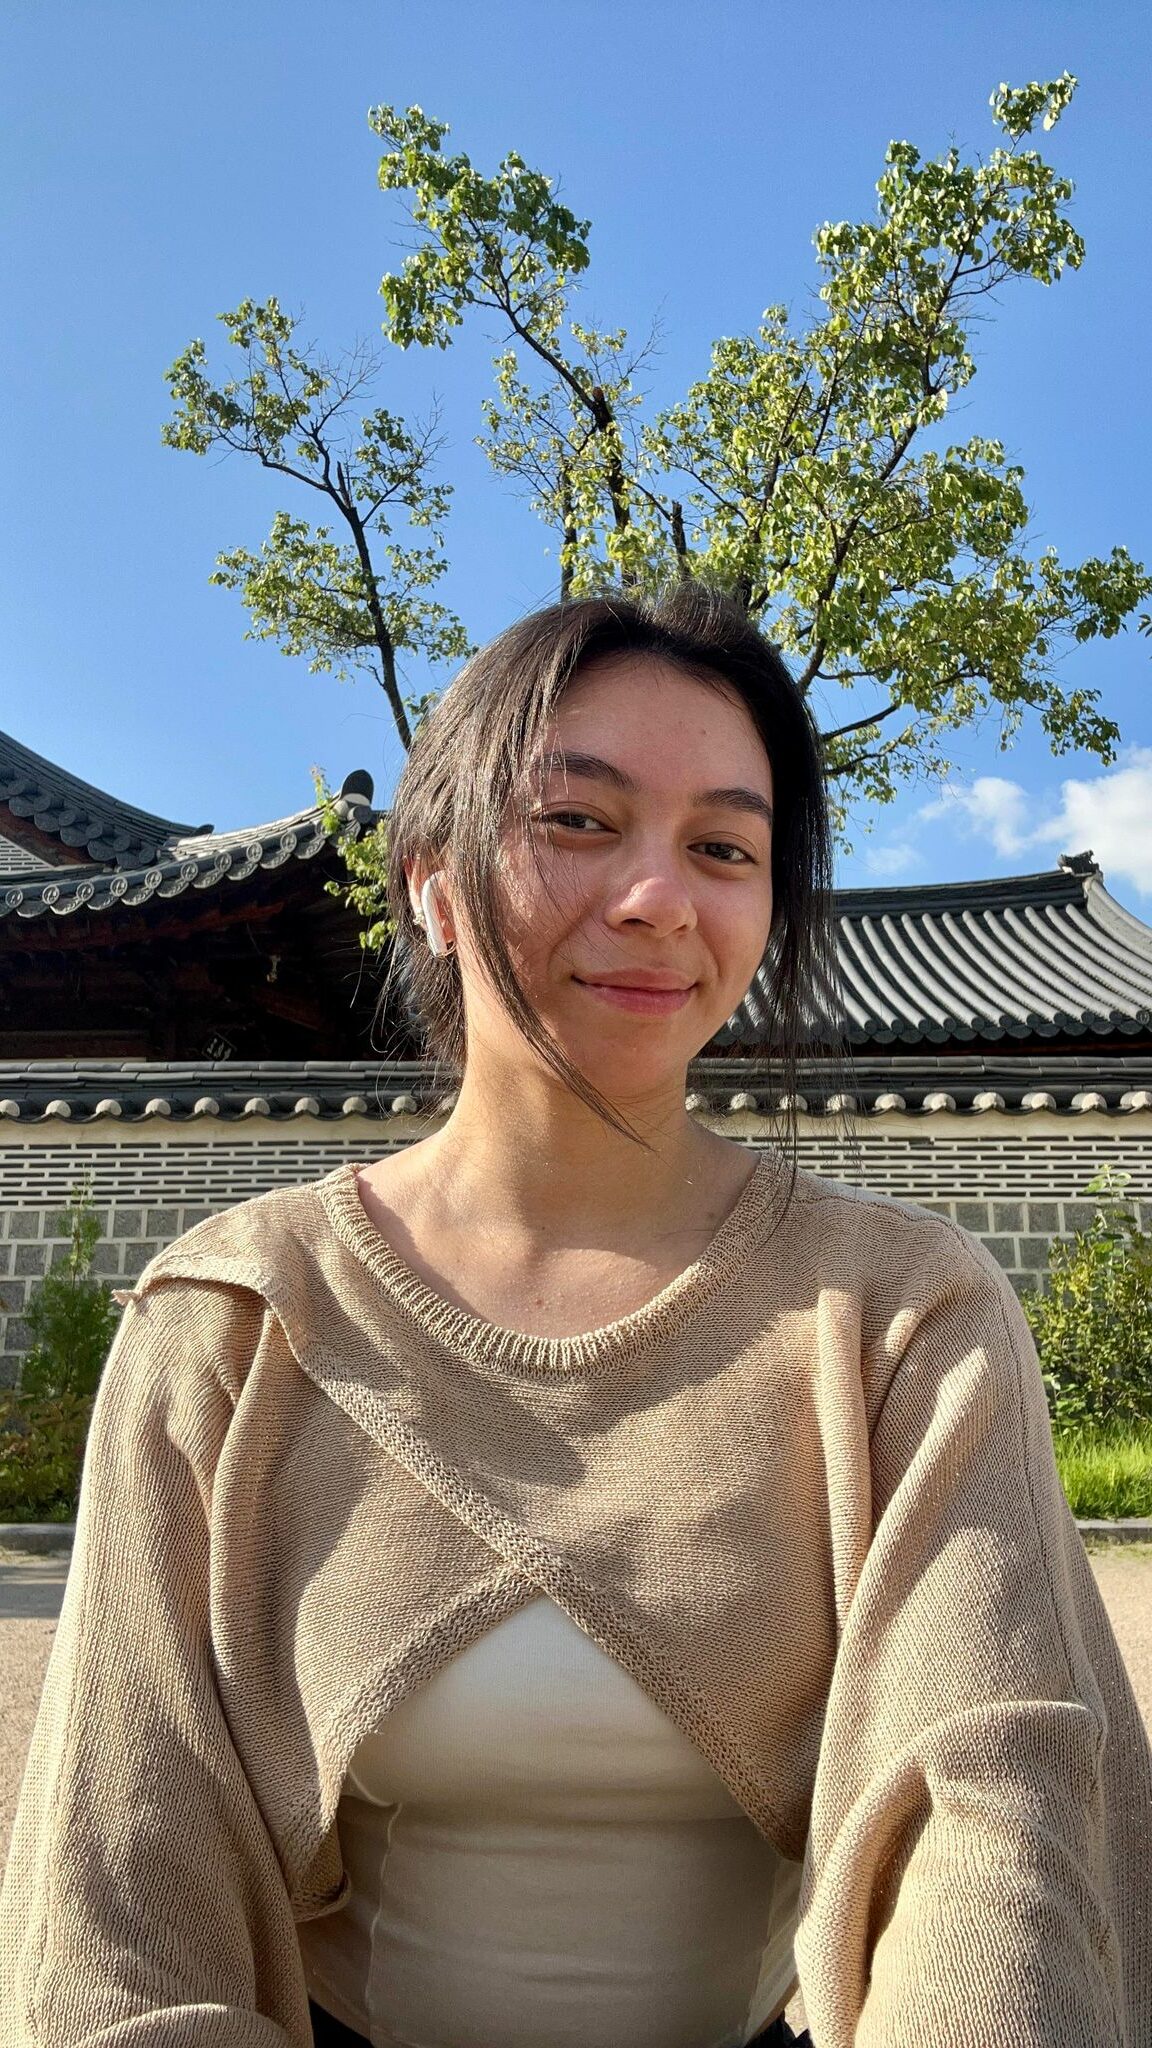 young female sitting outside smiling for the camera in a Korean historical palace background